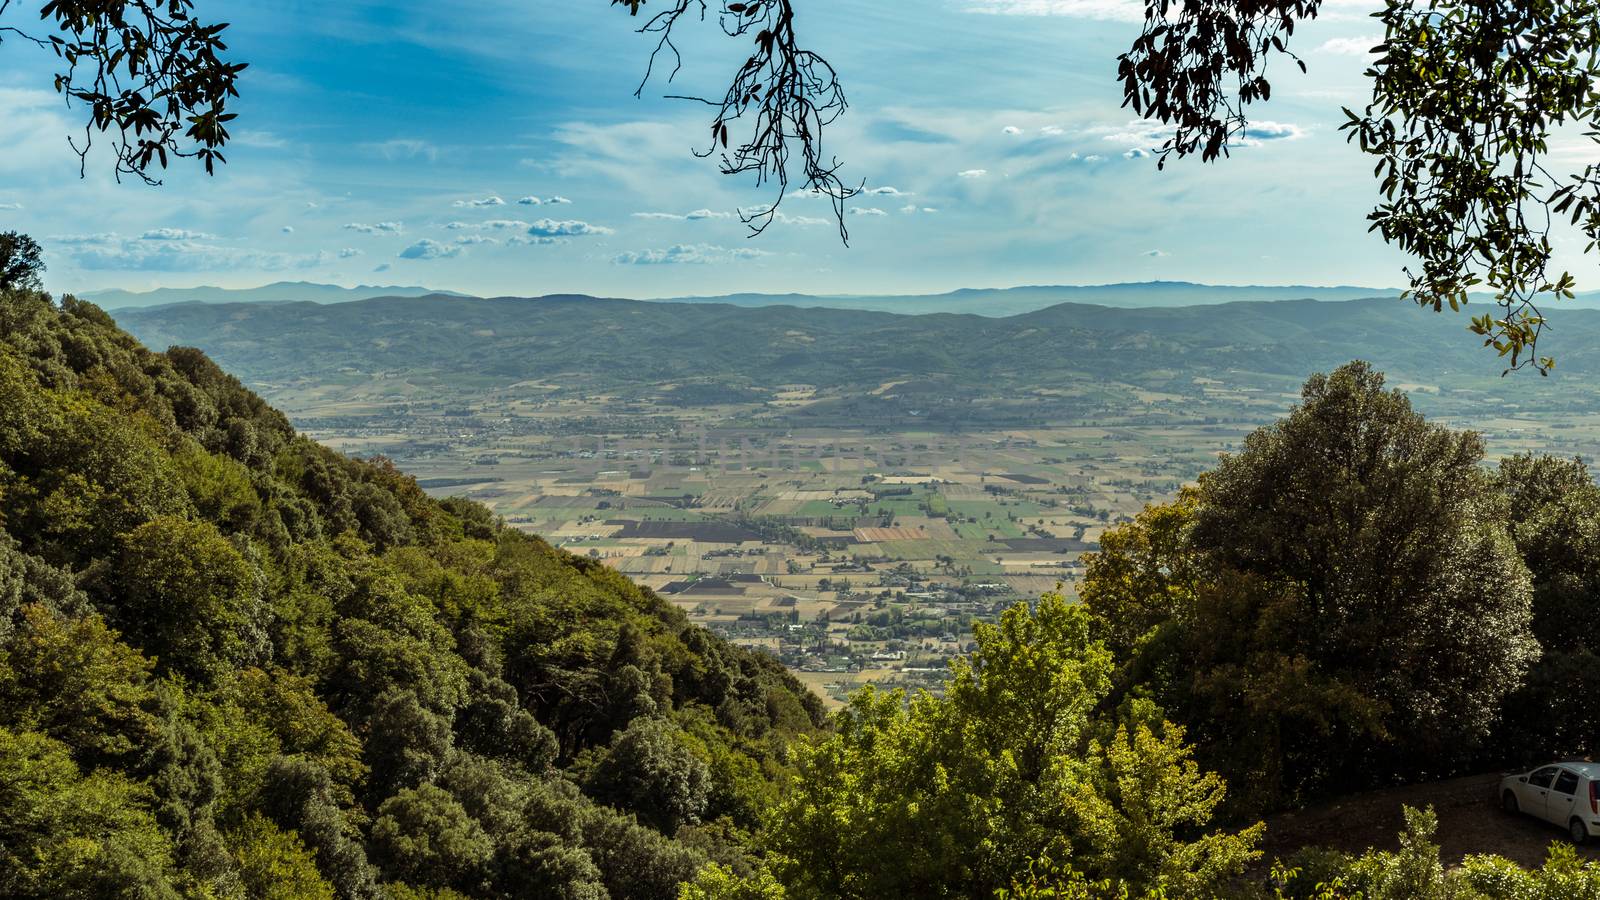 view of the wonderful countryside of Assisi from its hills